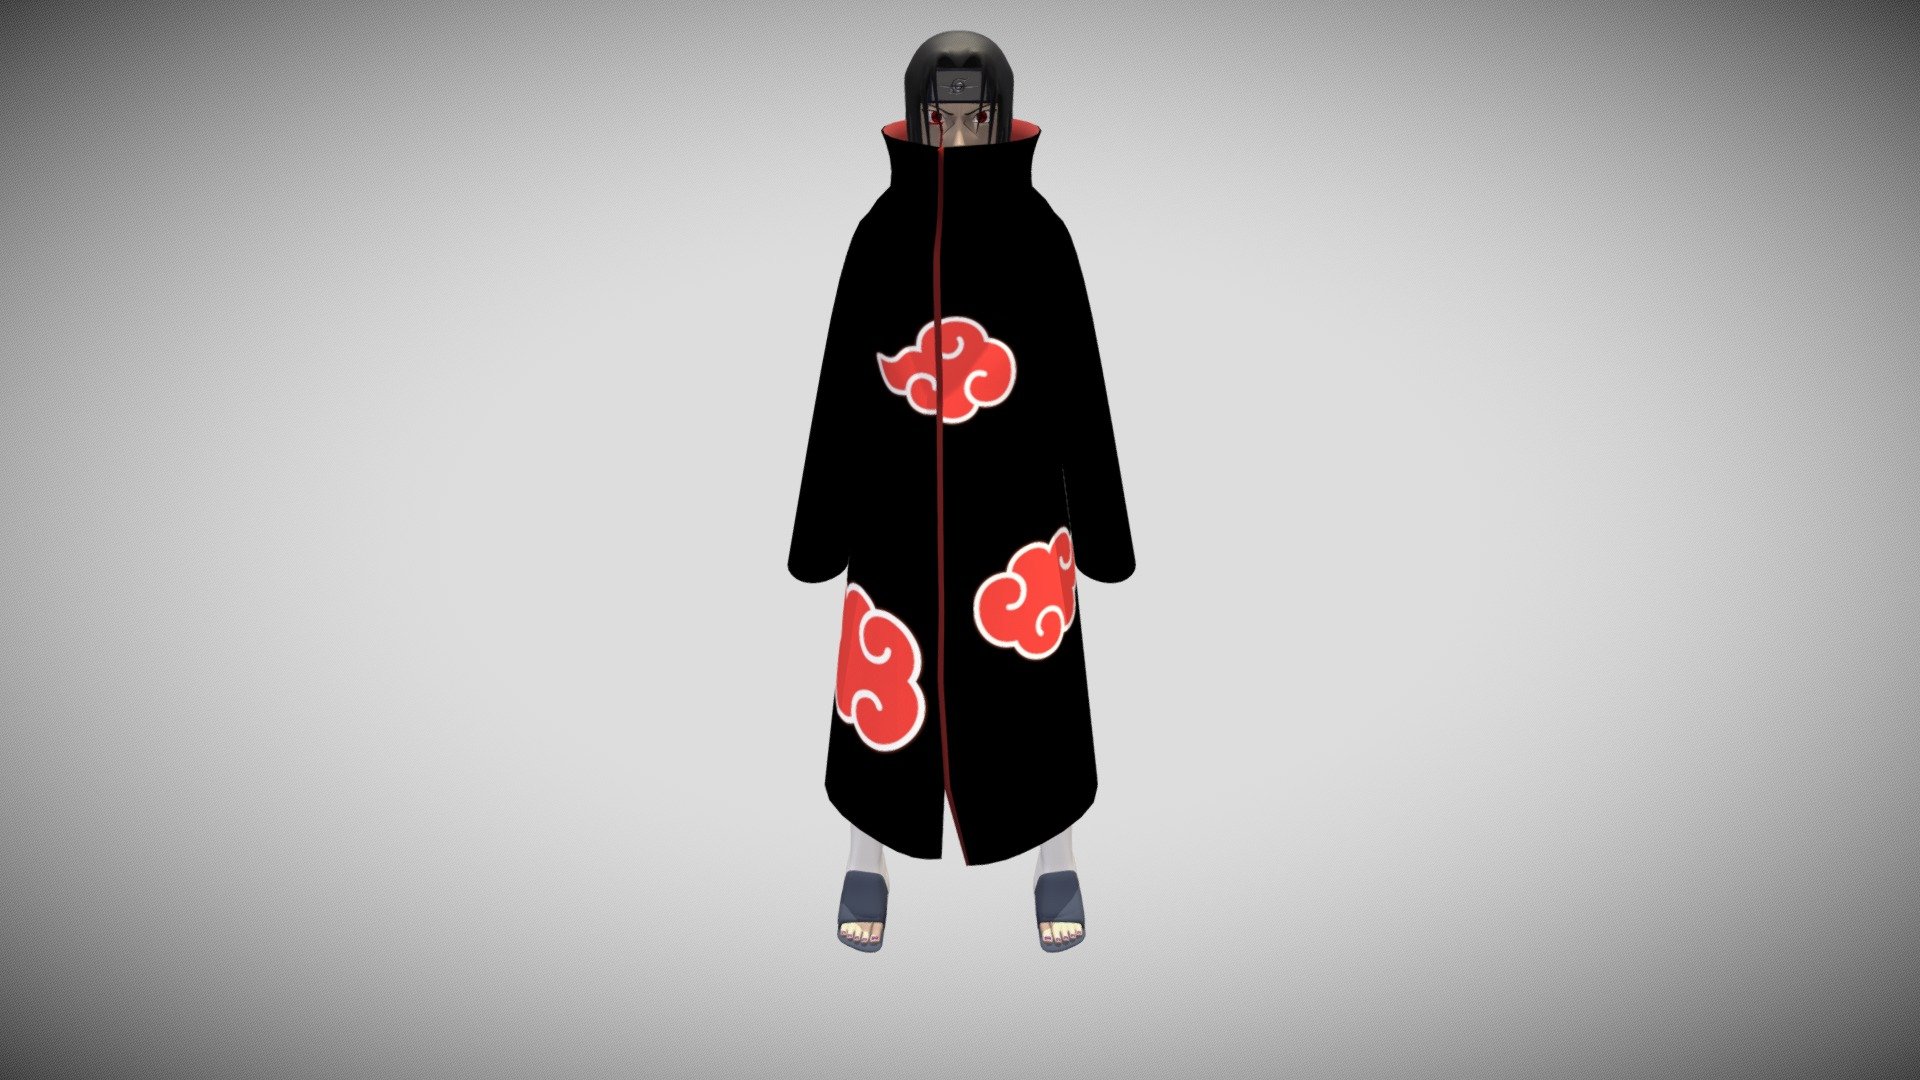 Shown here is Itachi Uchiha, wearing the Akatsuki uniform.

Itachi just used Amaterasu dōjutsu with his Mangekyō Sharingan.

Itachi is a character from the Naruto Shippuden series, the product is intended as Fan Art and does not in any way want to infringe on any rights of others.

The model was created entirely by me as a university student 3d model